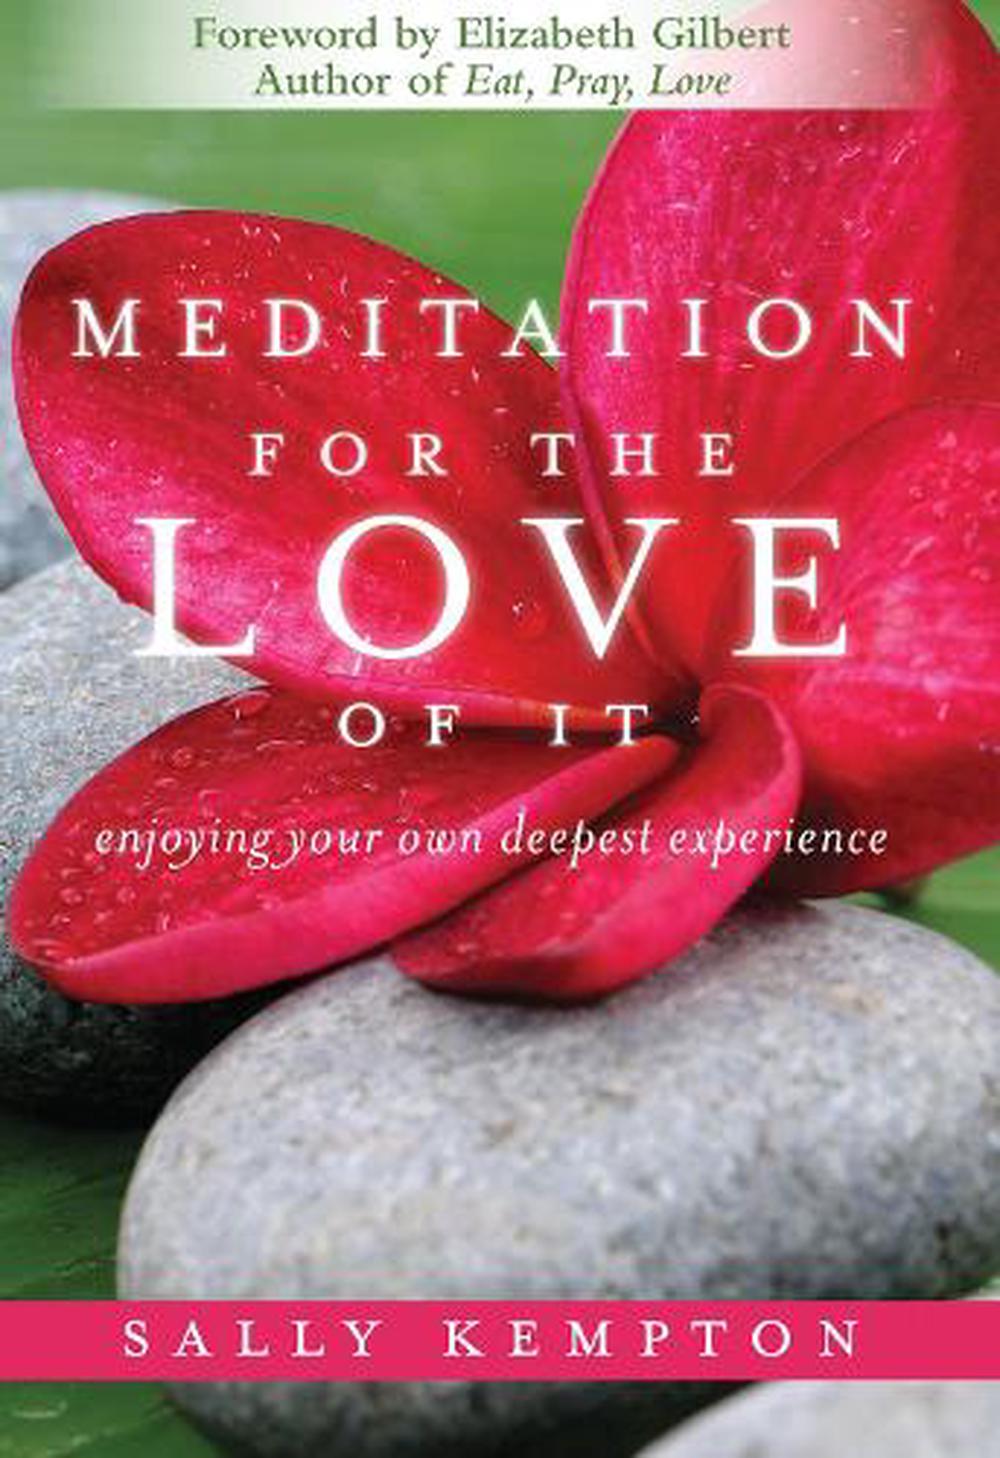 Meditation for the Love of it by Sally Kempton, Hardcover